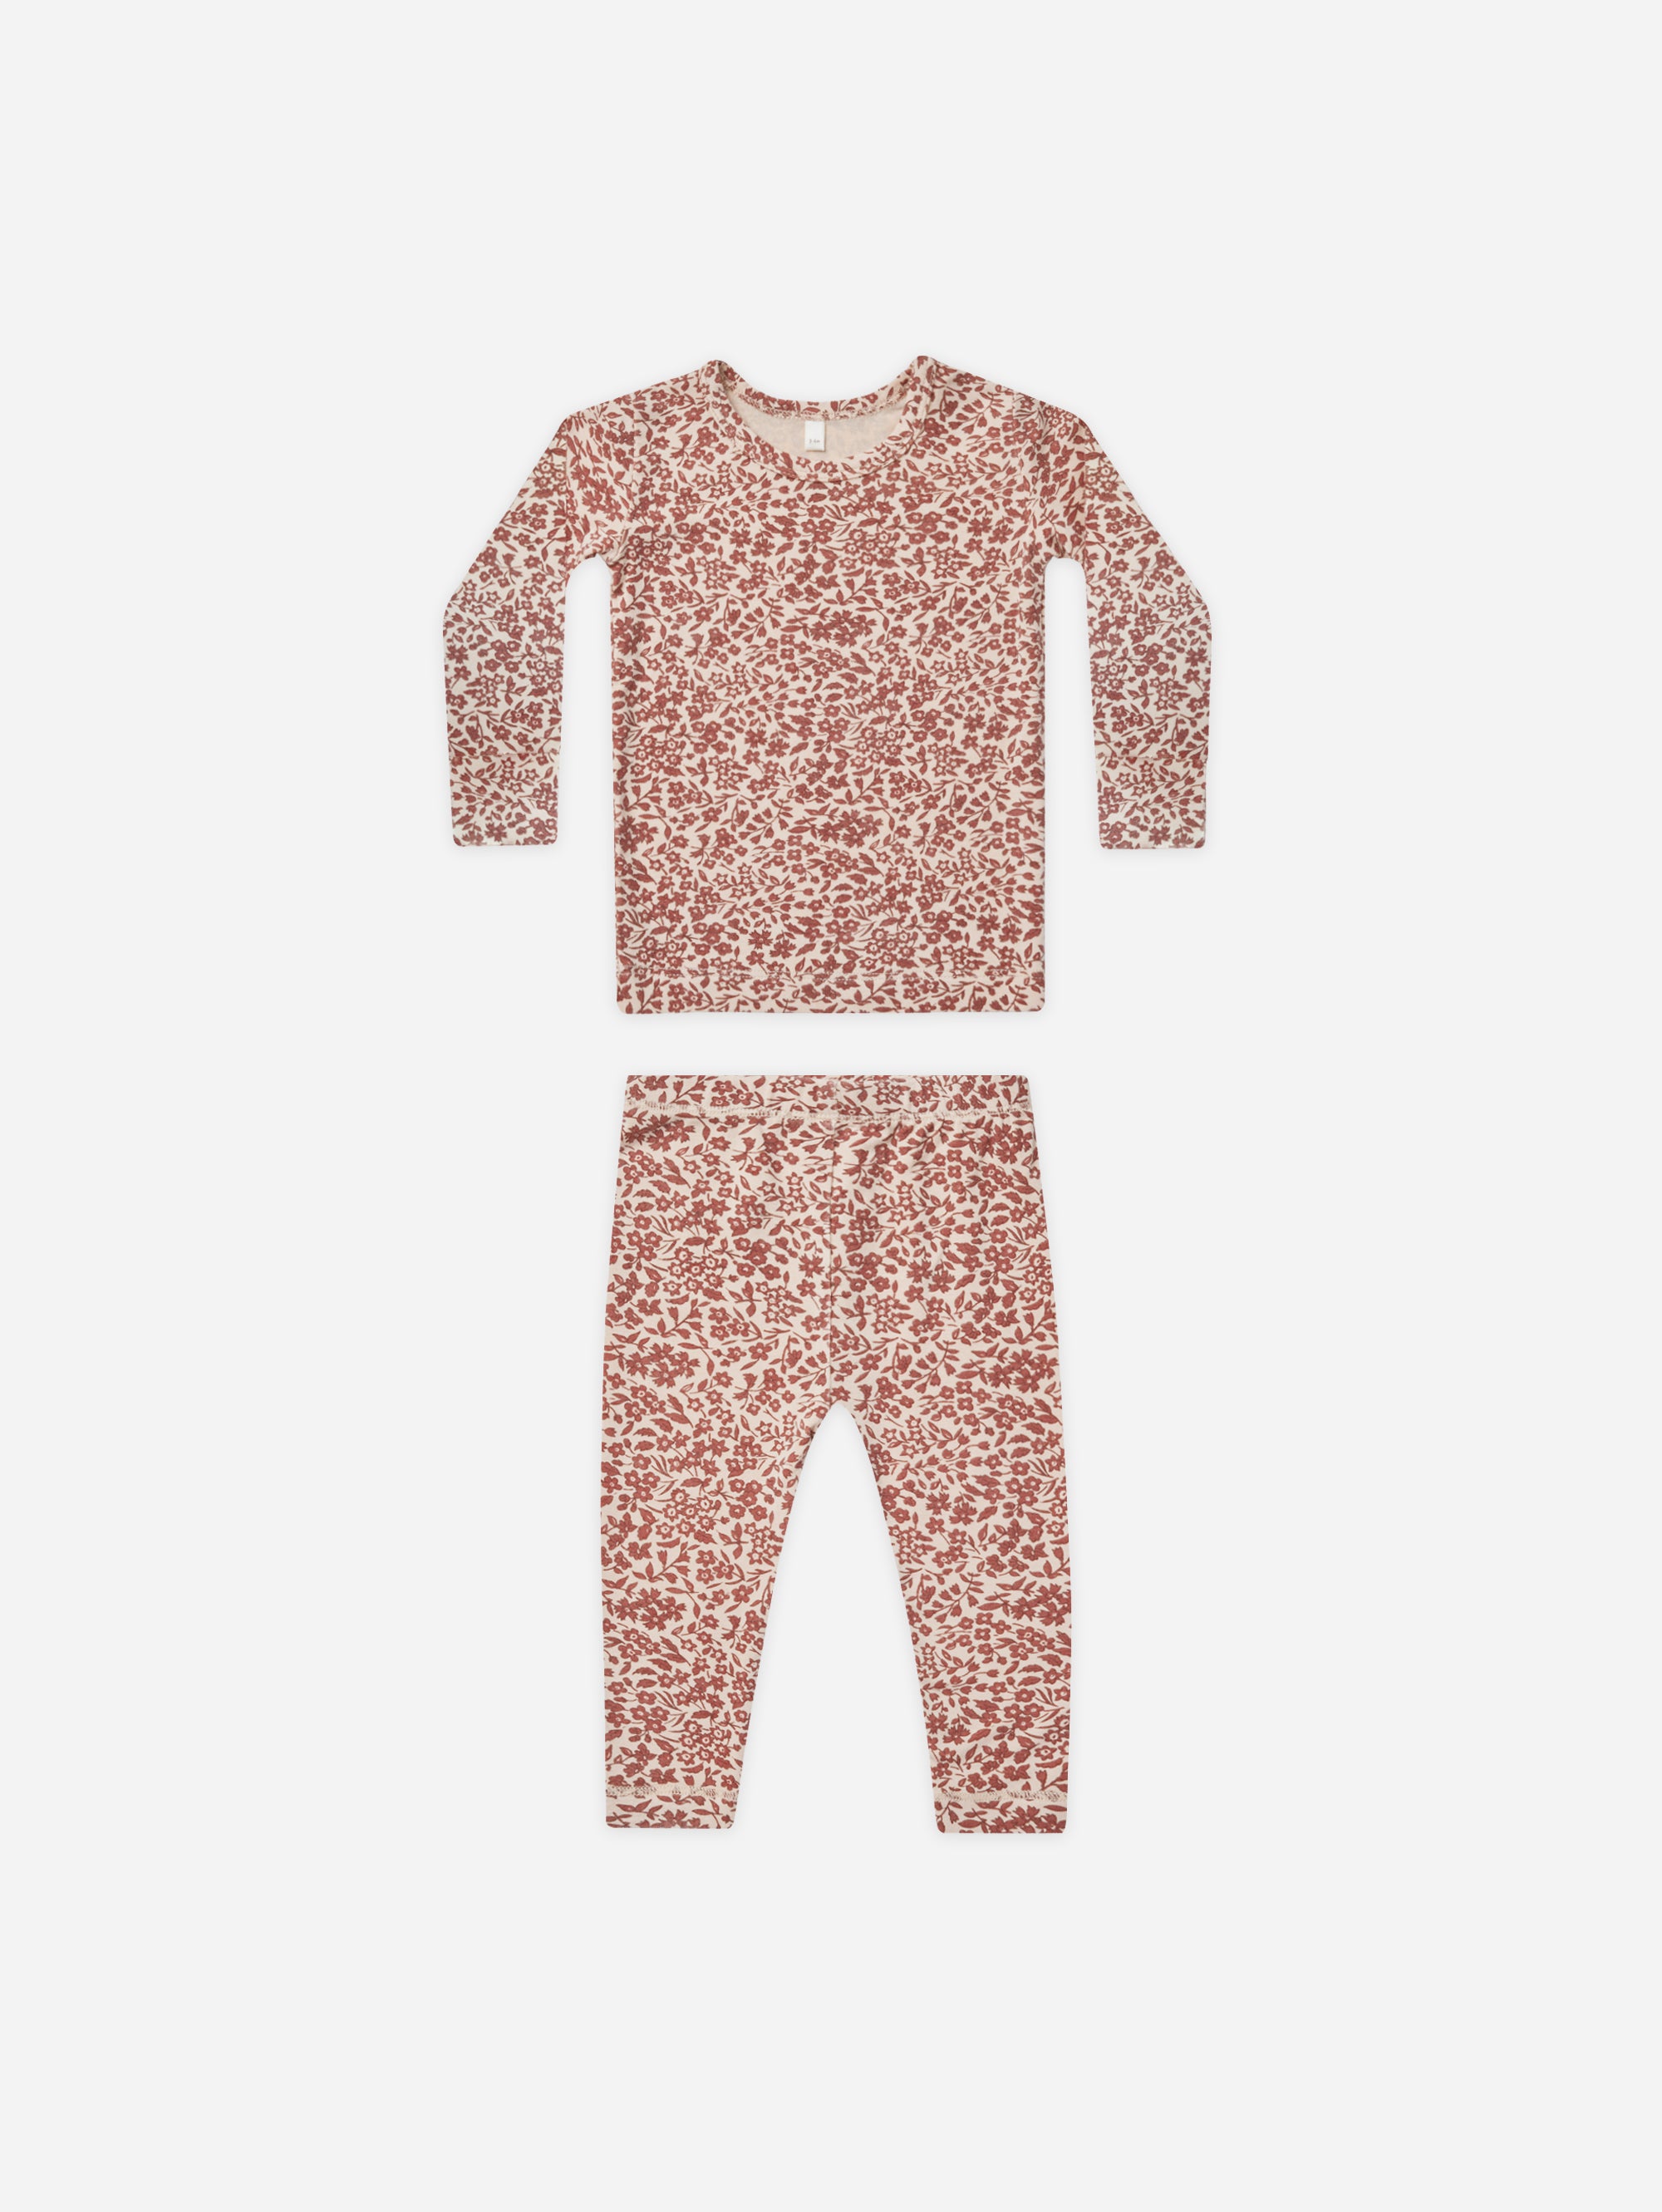 Bamboo Long Sleeve Pajama Set || Flower Field - Rylee + Cru | Kids Clothes | Trendy Baby Clothes | Modern Infant Outfits |